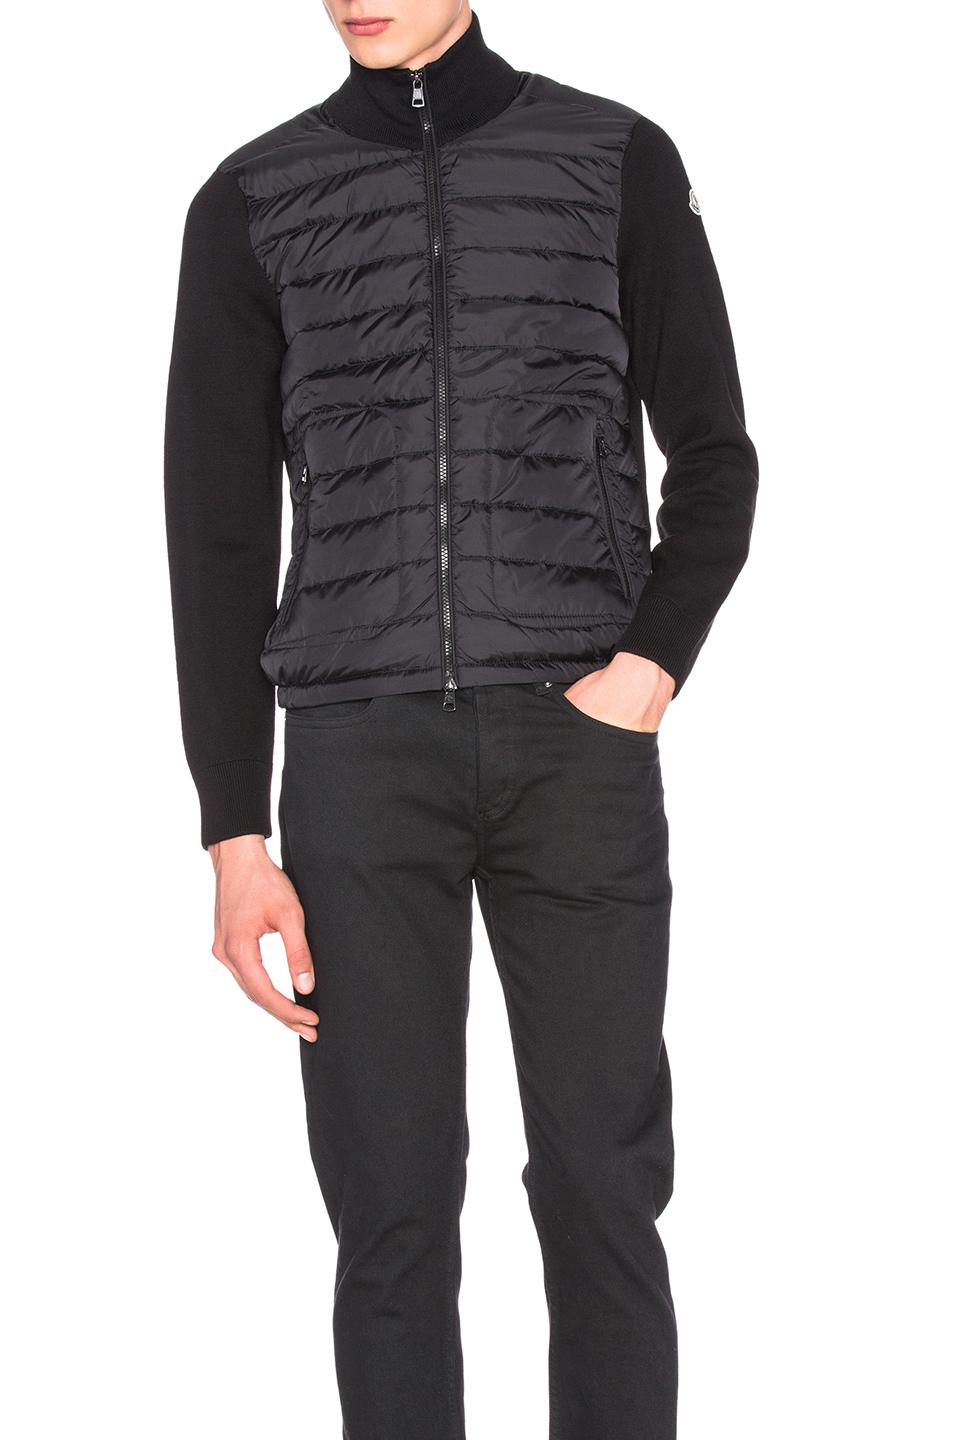 Lyst - Moncler Cardigan Sweater in Black